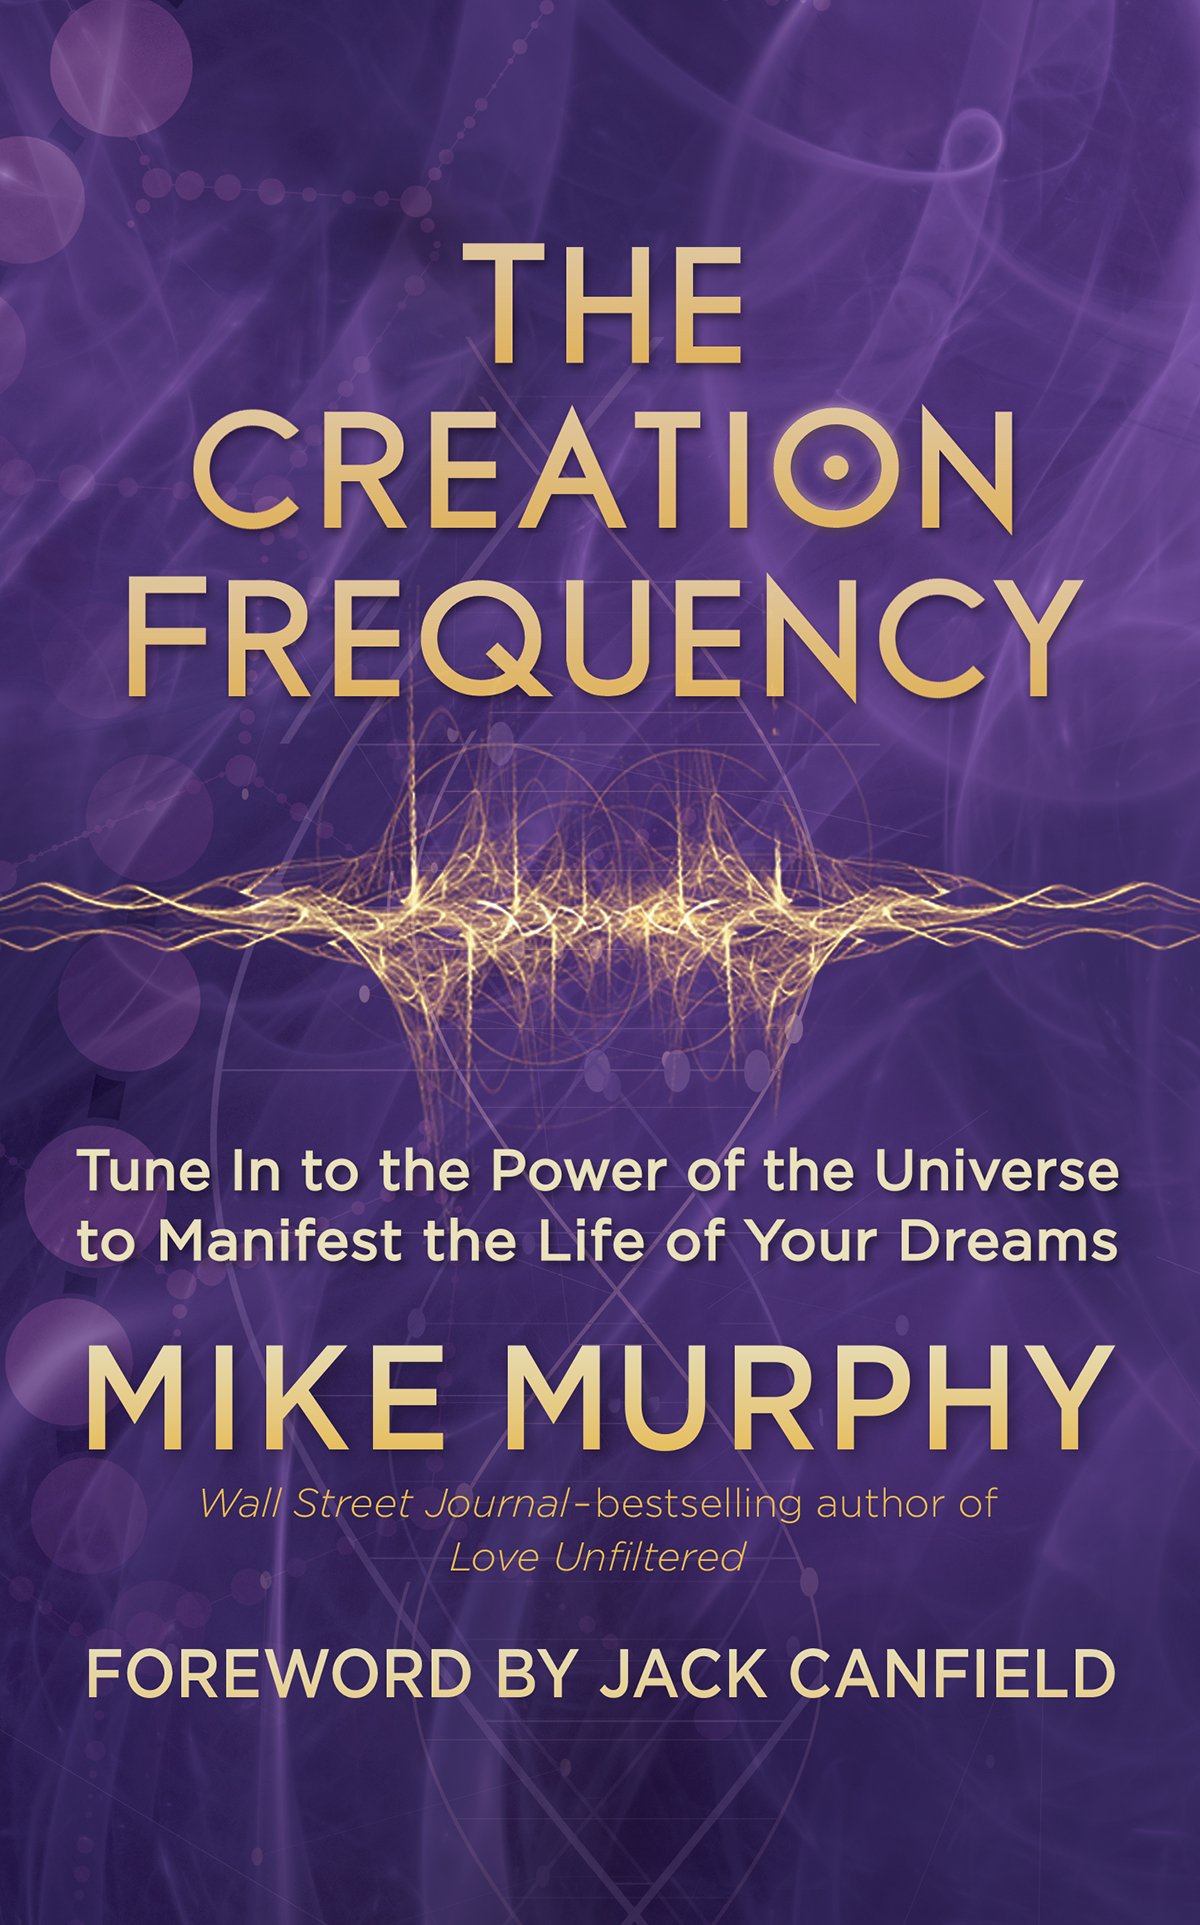 Mike Murphy - The Creation Frequency